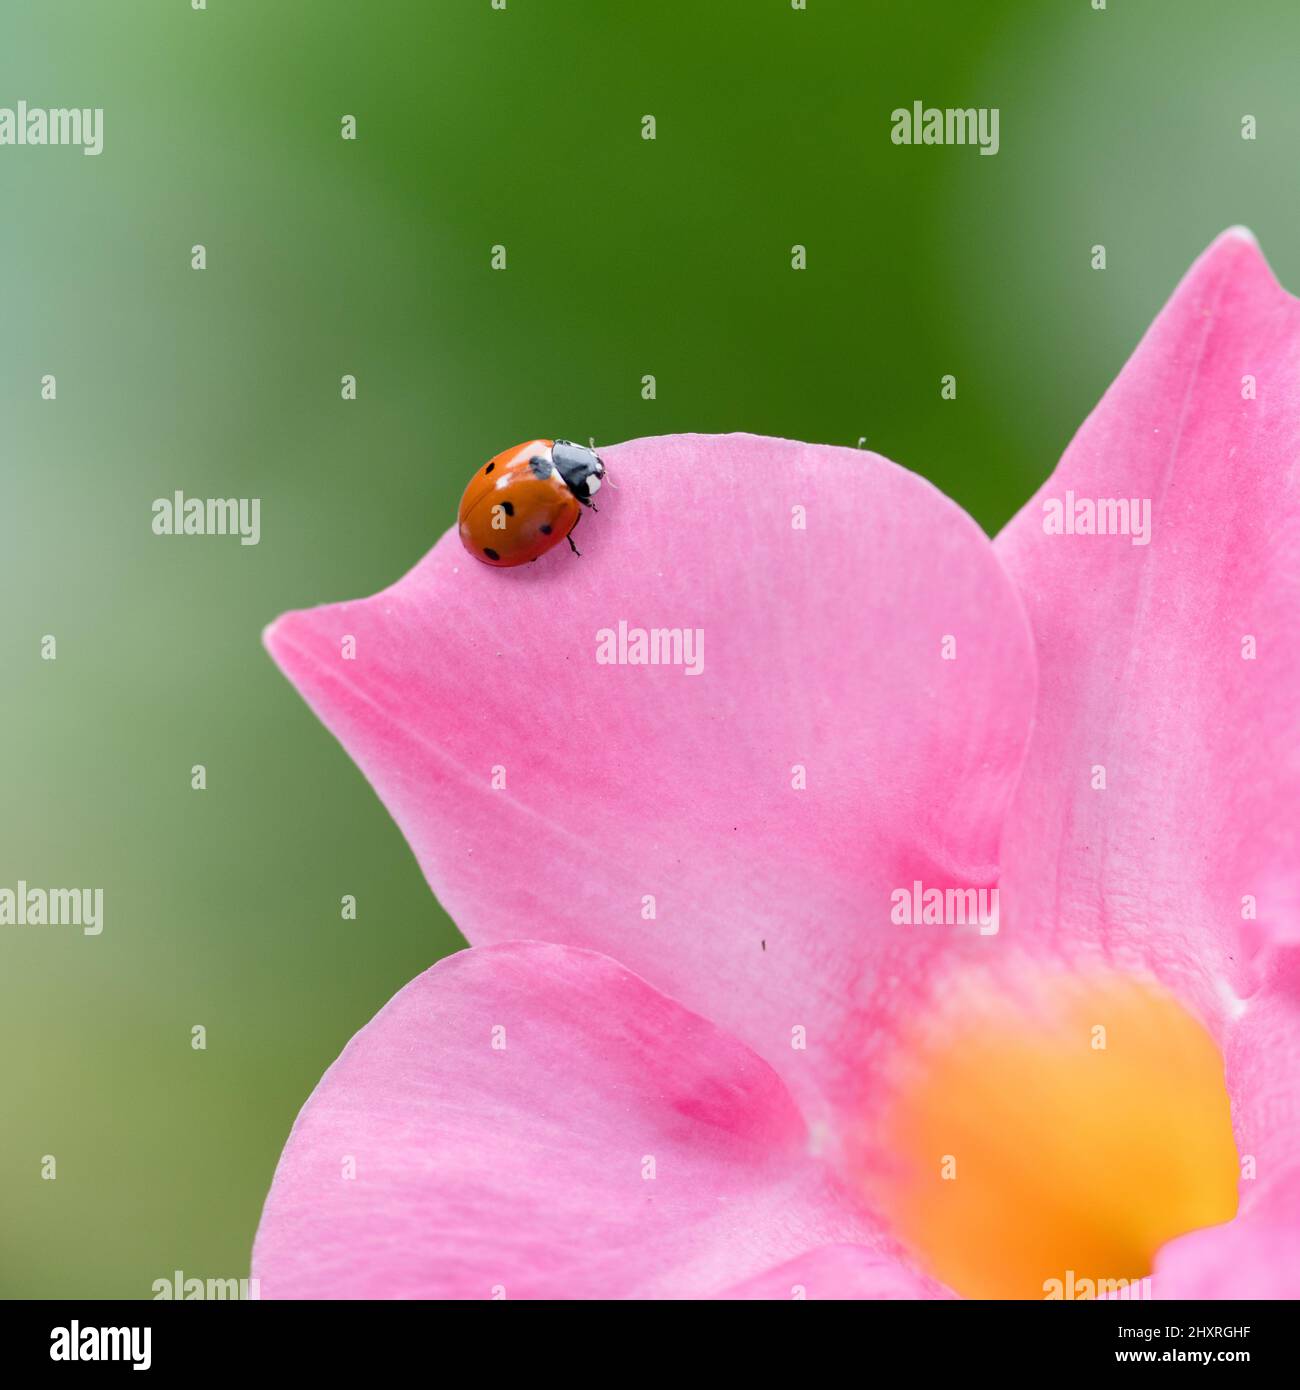 Macro shot of a ladybug on a pink mandevilla flower against a blurred background Stock Photo